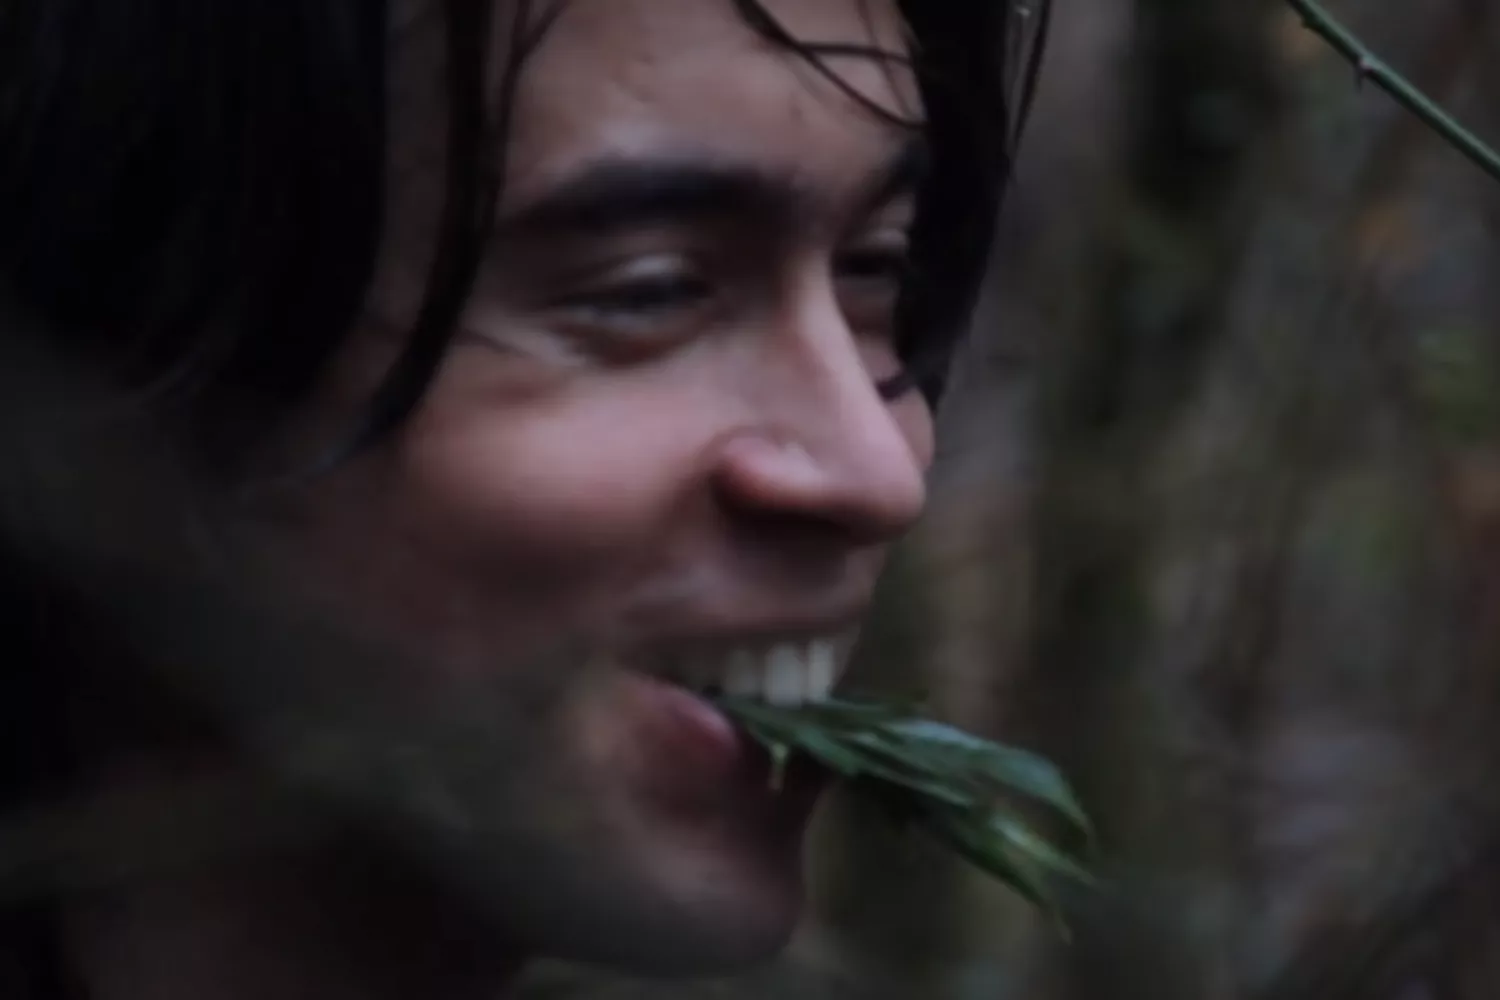 Alex G invites you into his world with this ‘Mud’ video